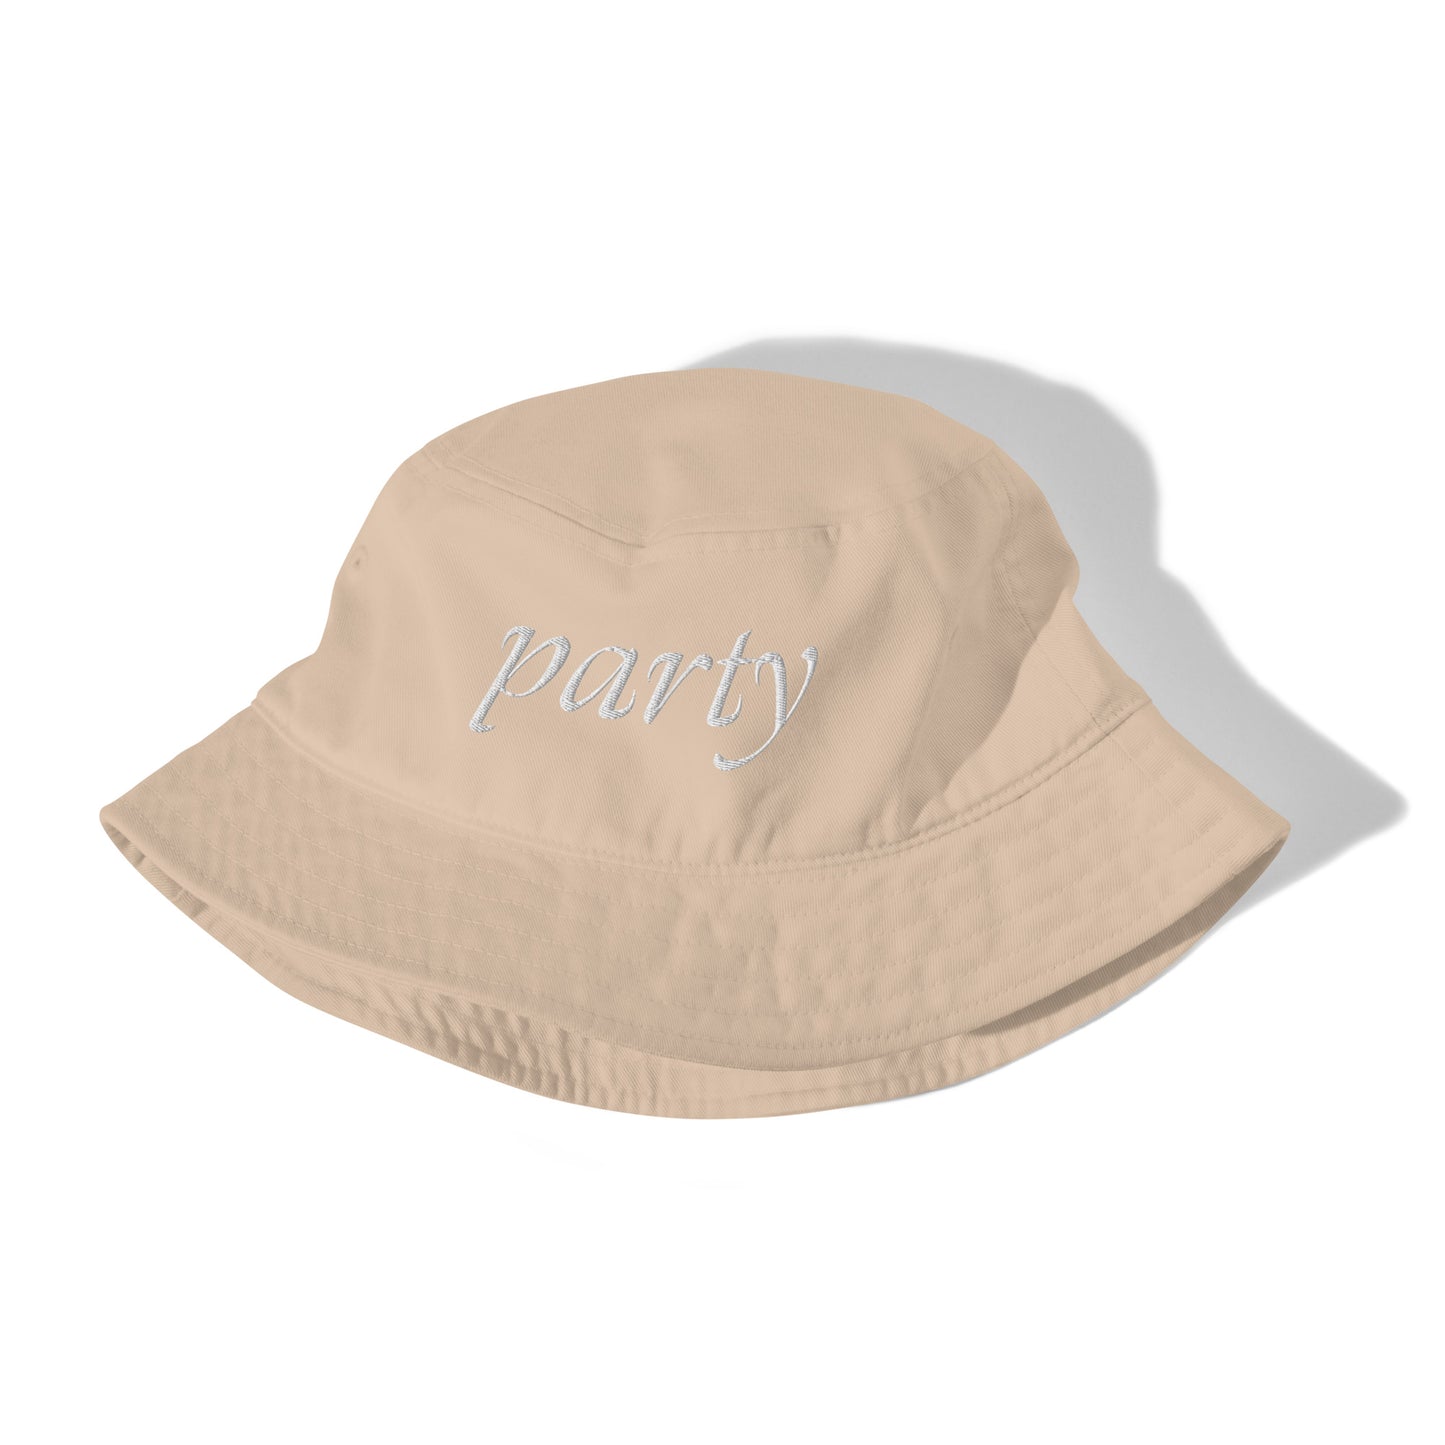 Party Organic Cotton Bucket Hat (White Edition)